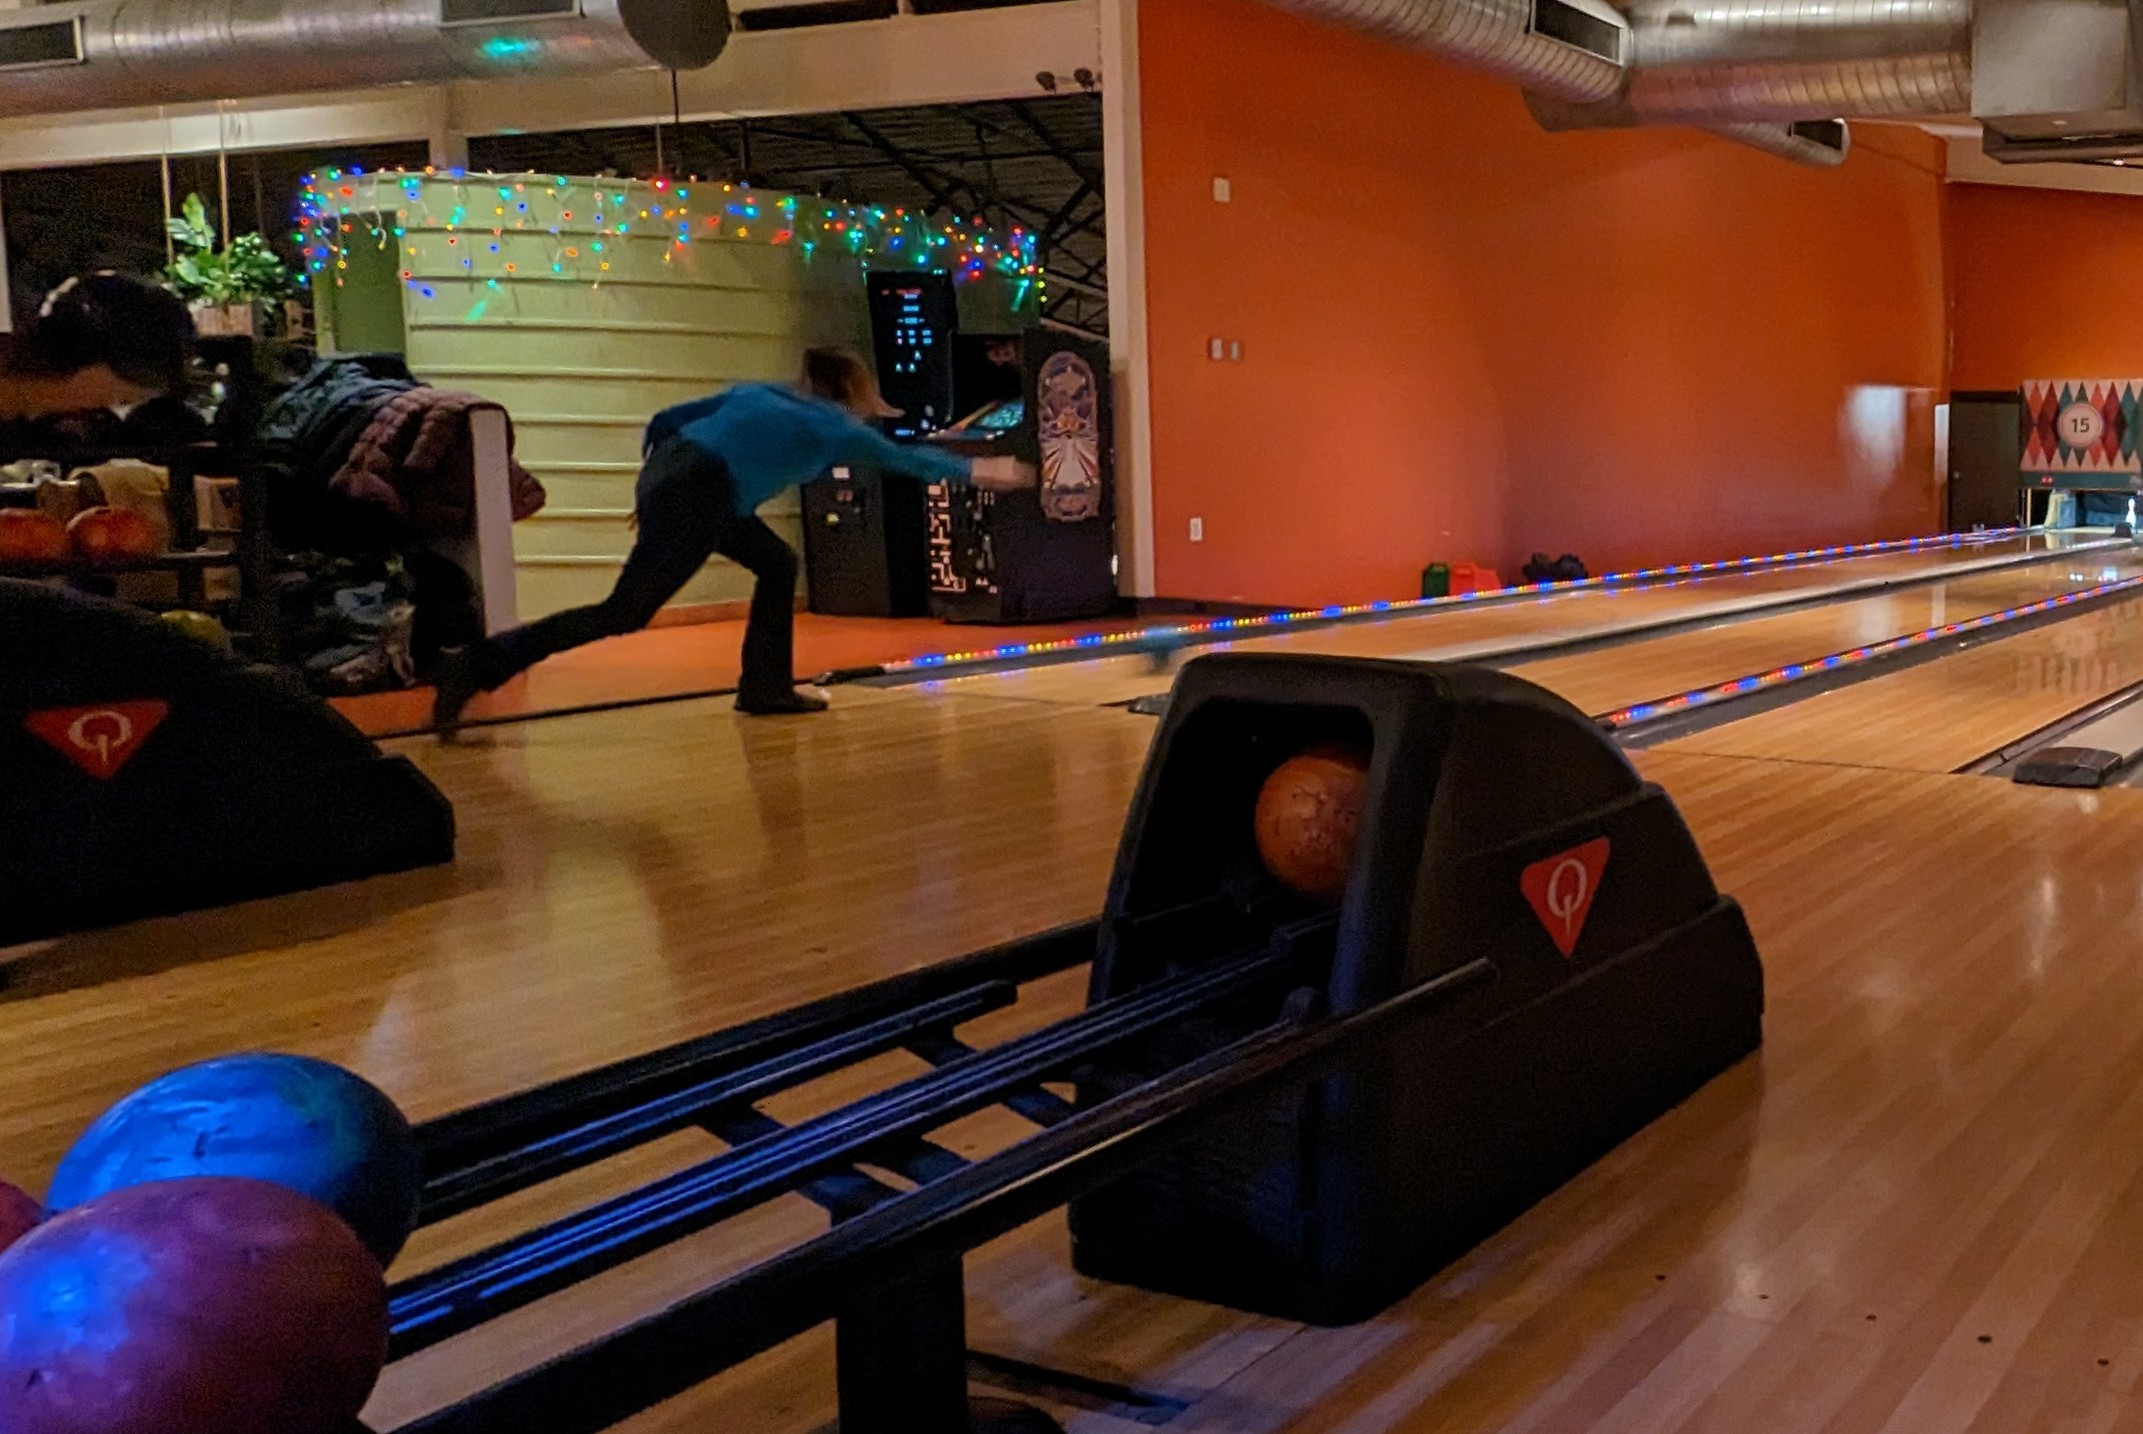 Picture of lab member just as they roll bowling ball down the lane